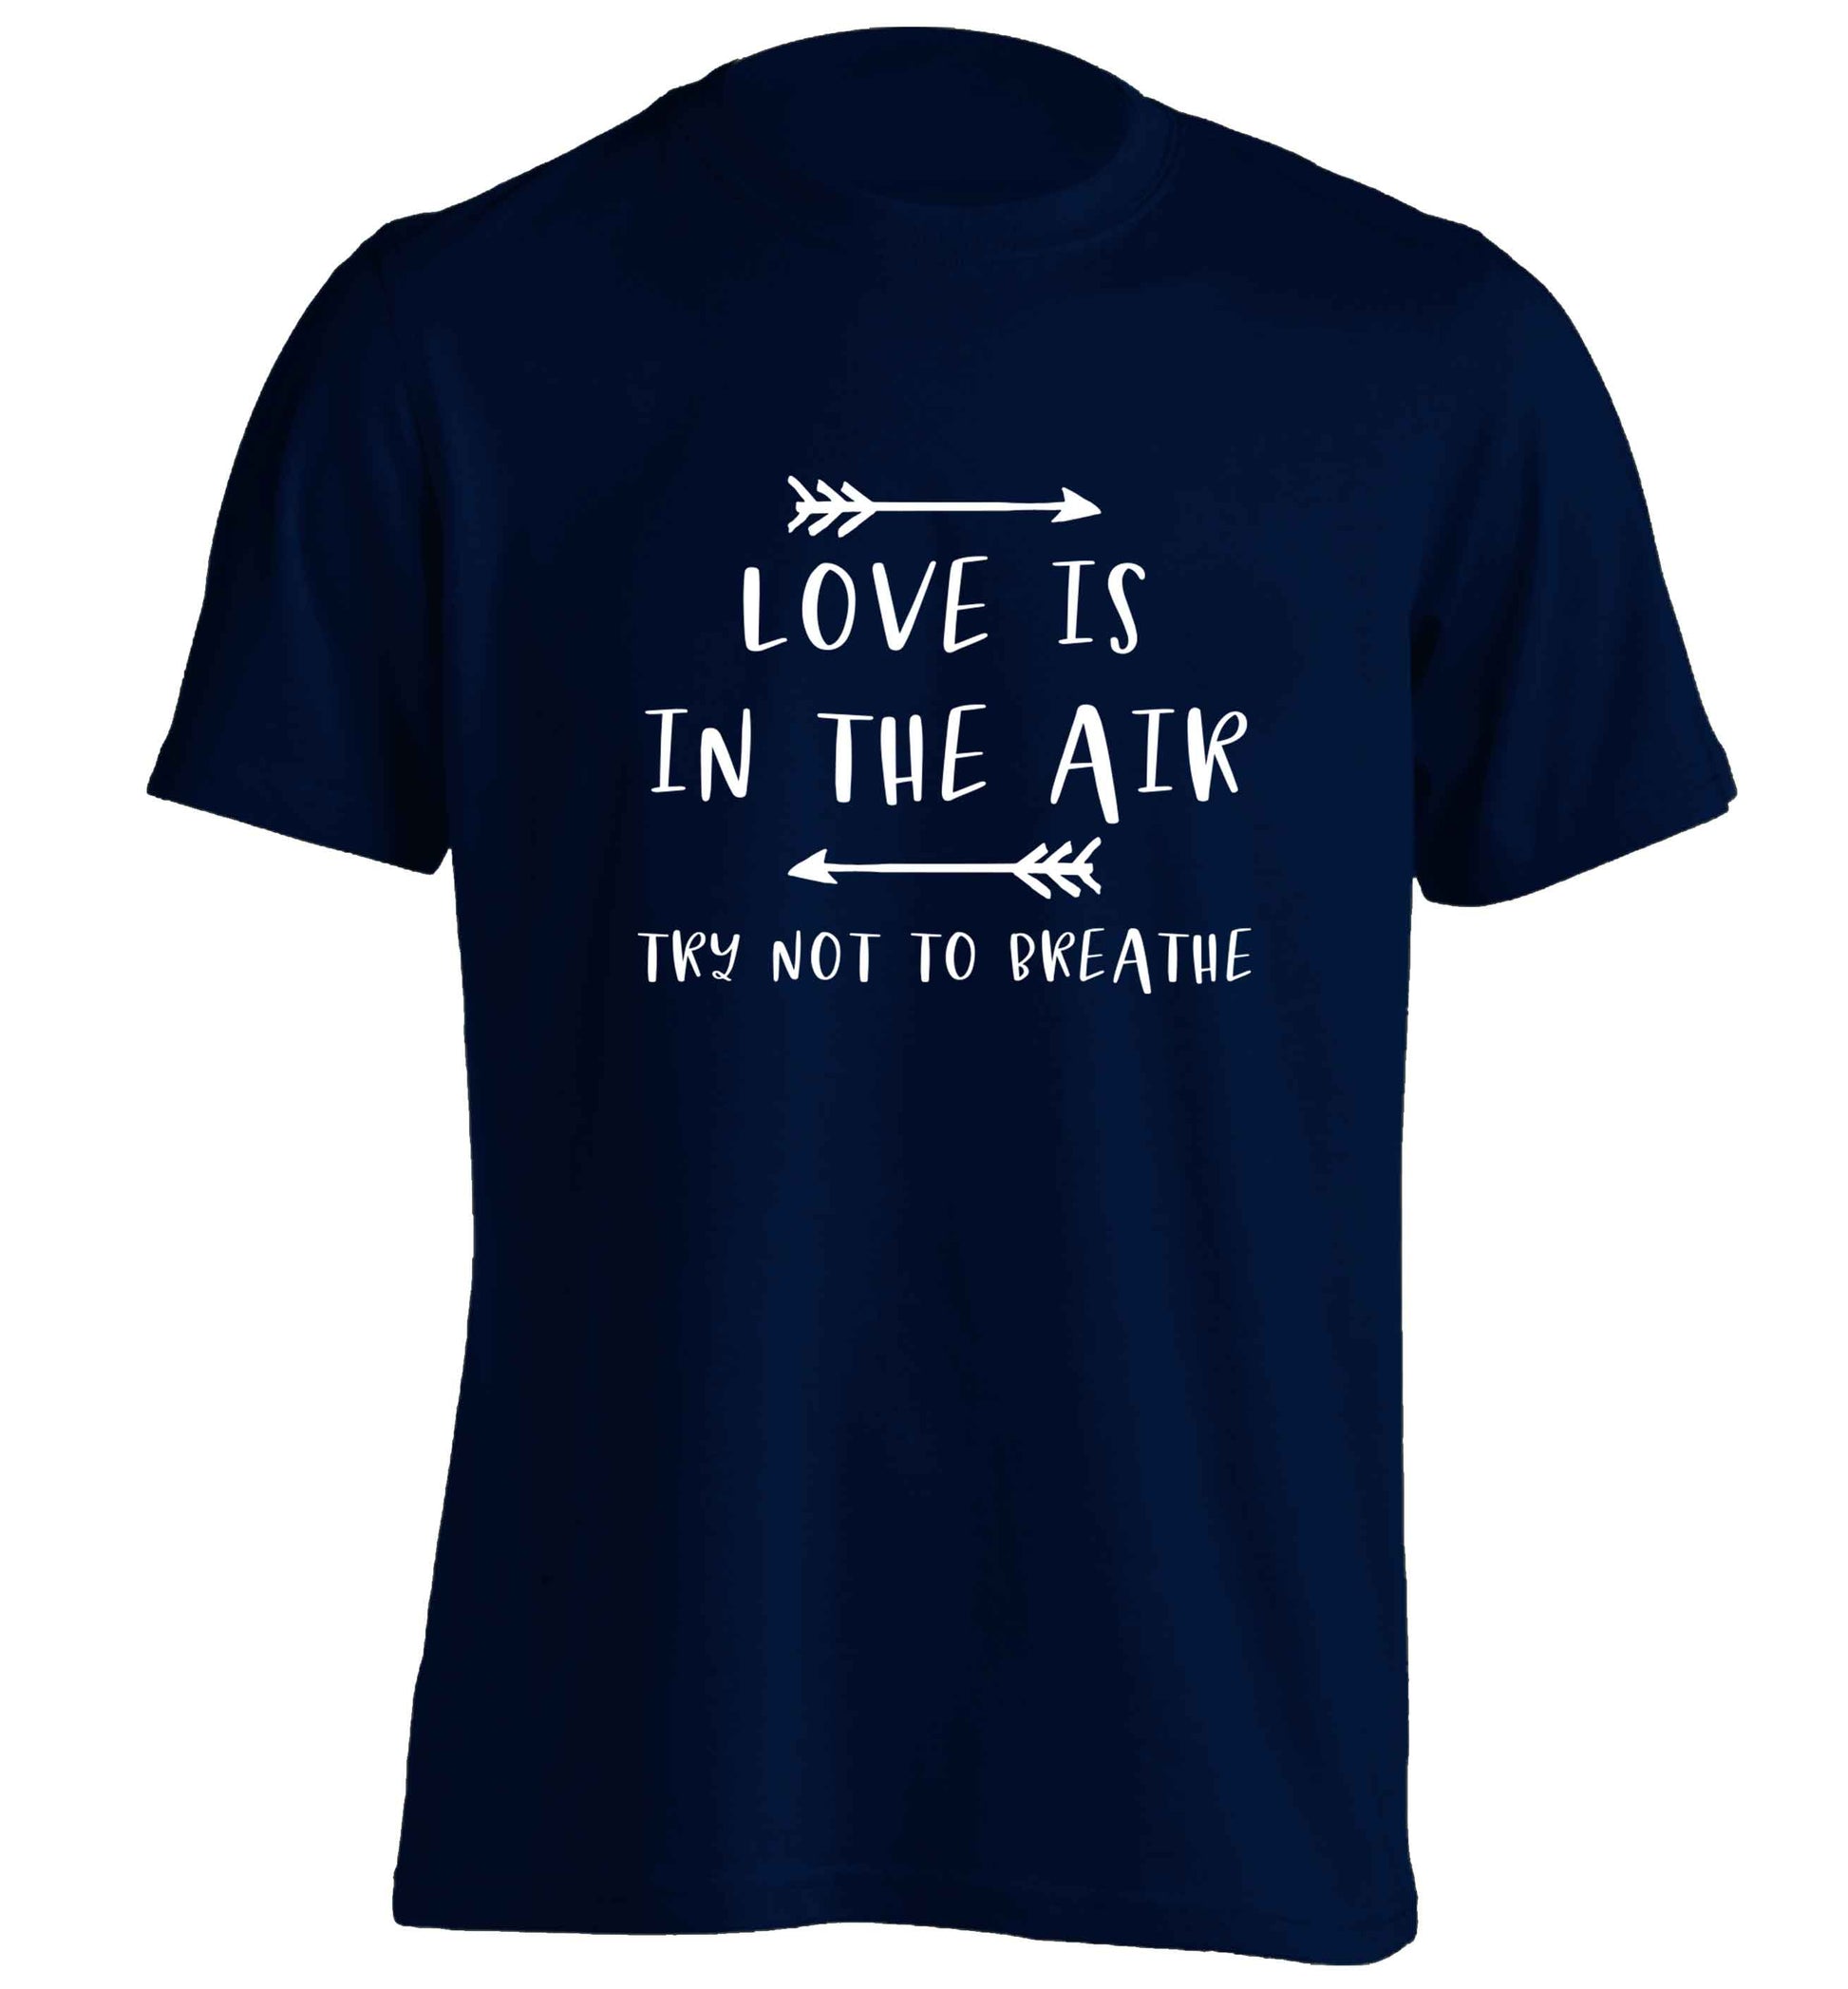 Love is in the air try not to breathe adults unisex navy Tshirt 2XL